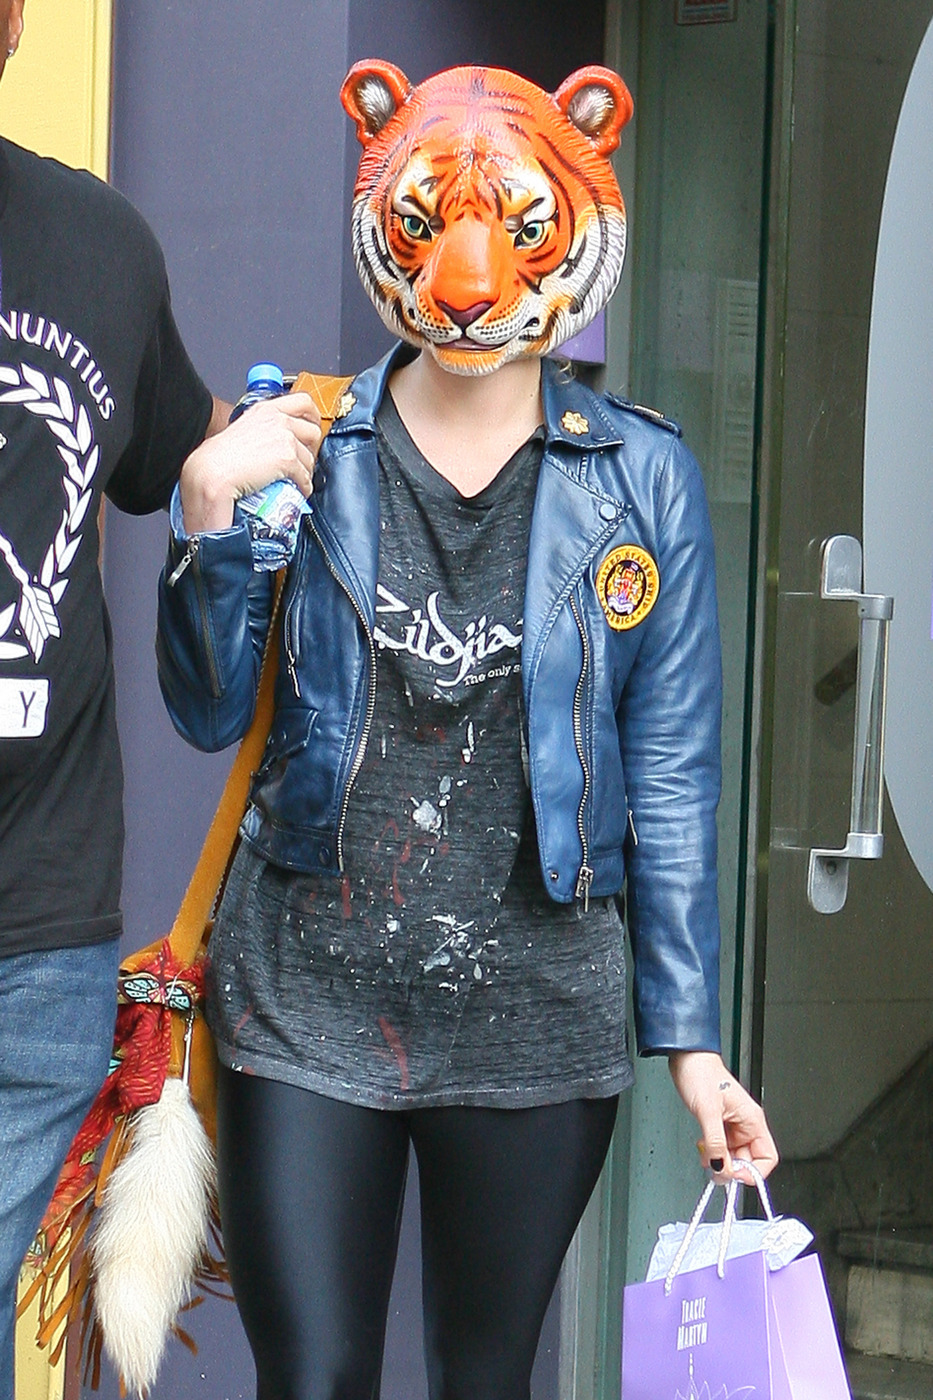 Ke$ha leaves the Tracie Martyn Salon in NYC wearing a tiger mask and cowboy boots as she gets into a taxi cab